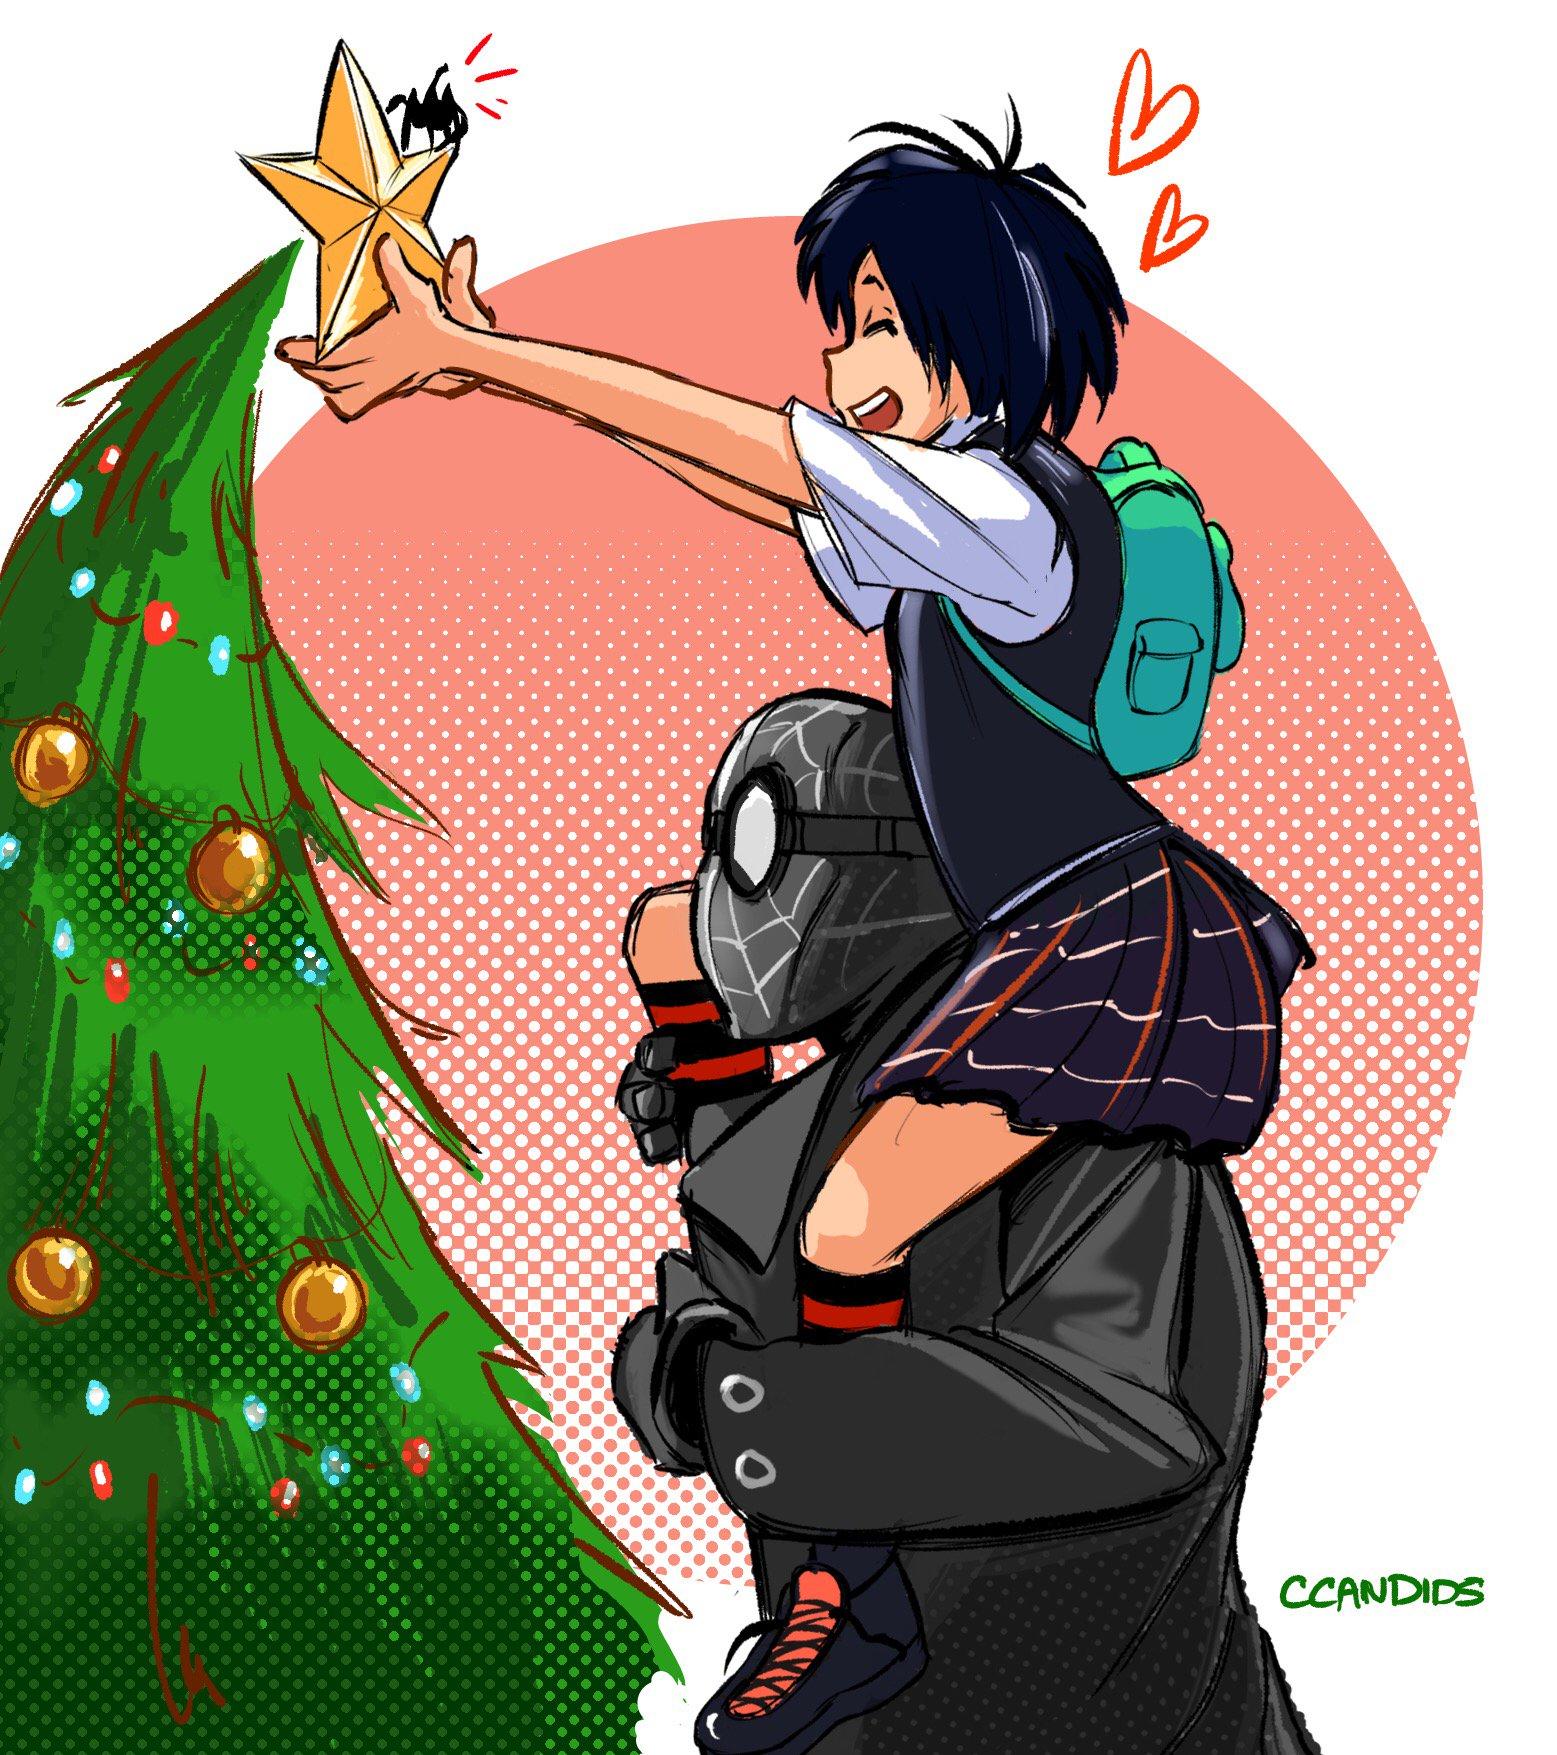 A Happy Spider Holiday!